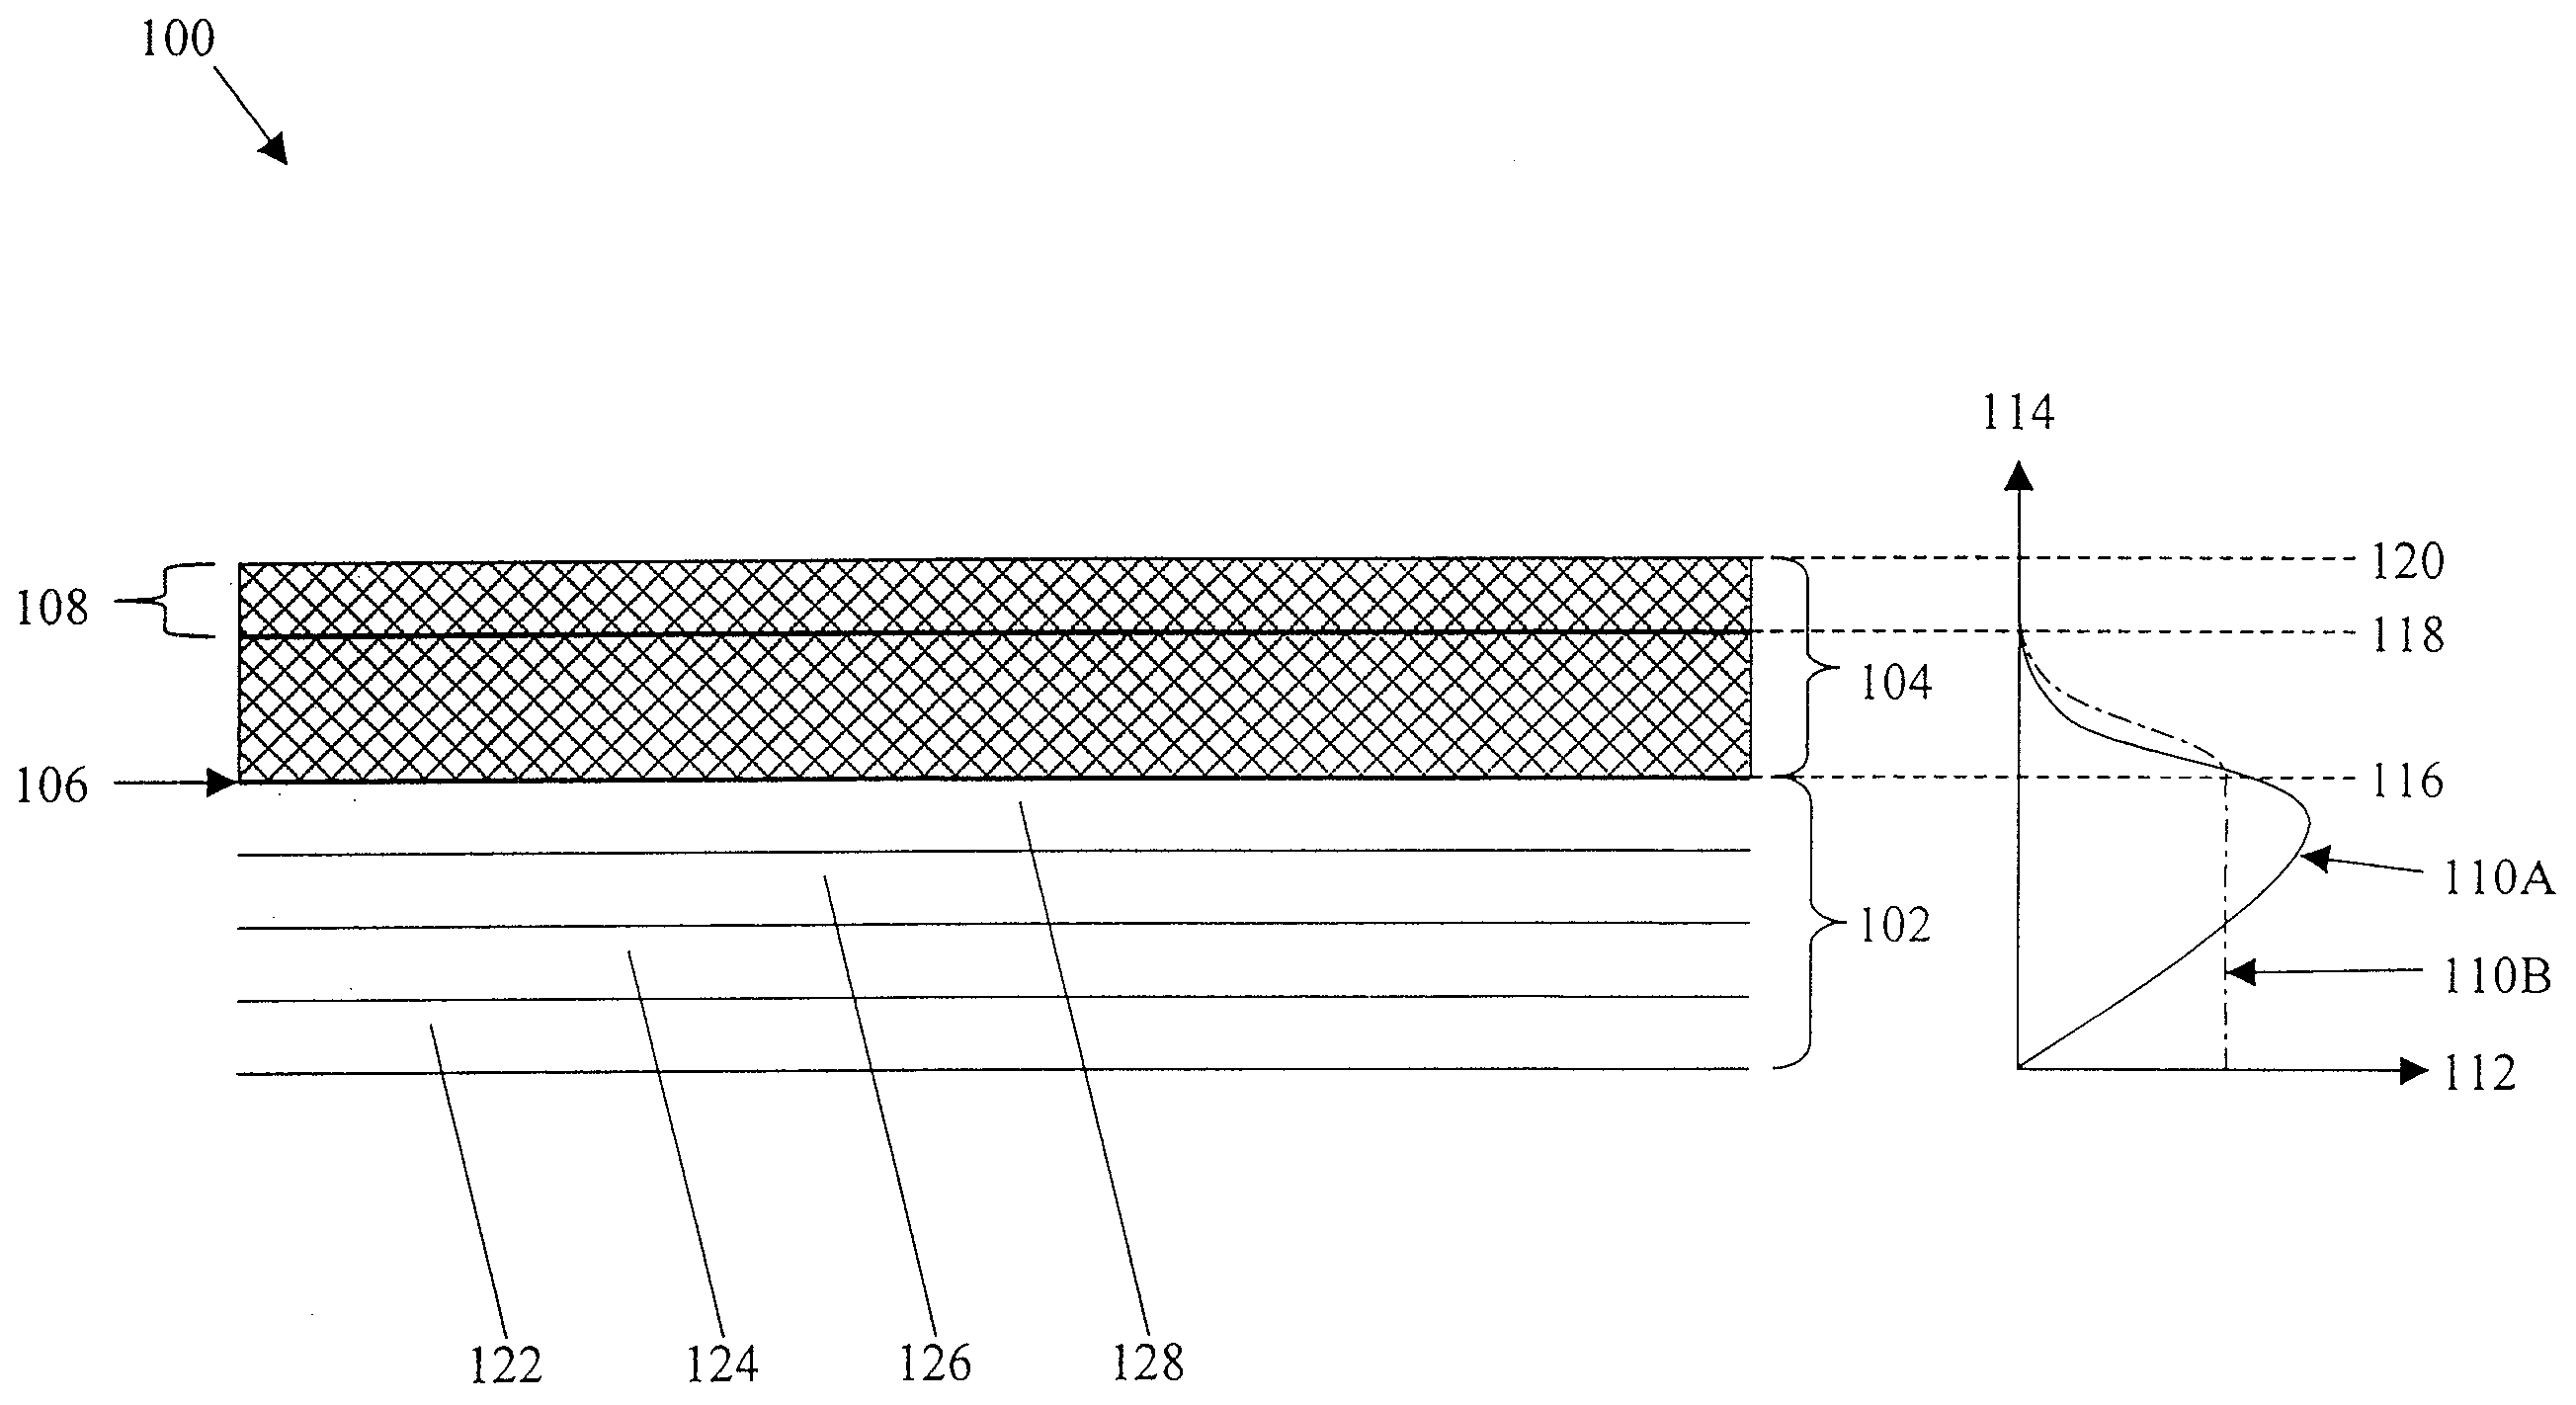 Semiconductor structures employing strained material layers with defined impurity gradients and methods for fabricating same